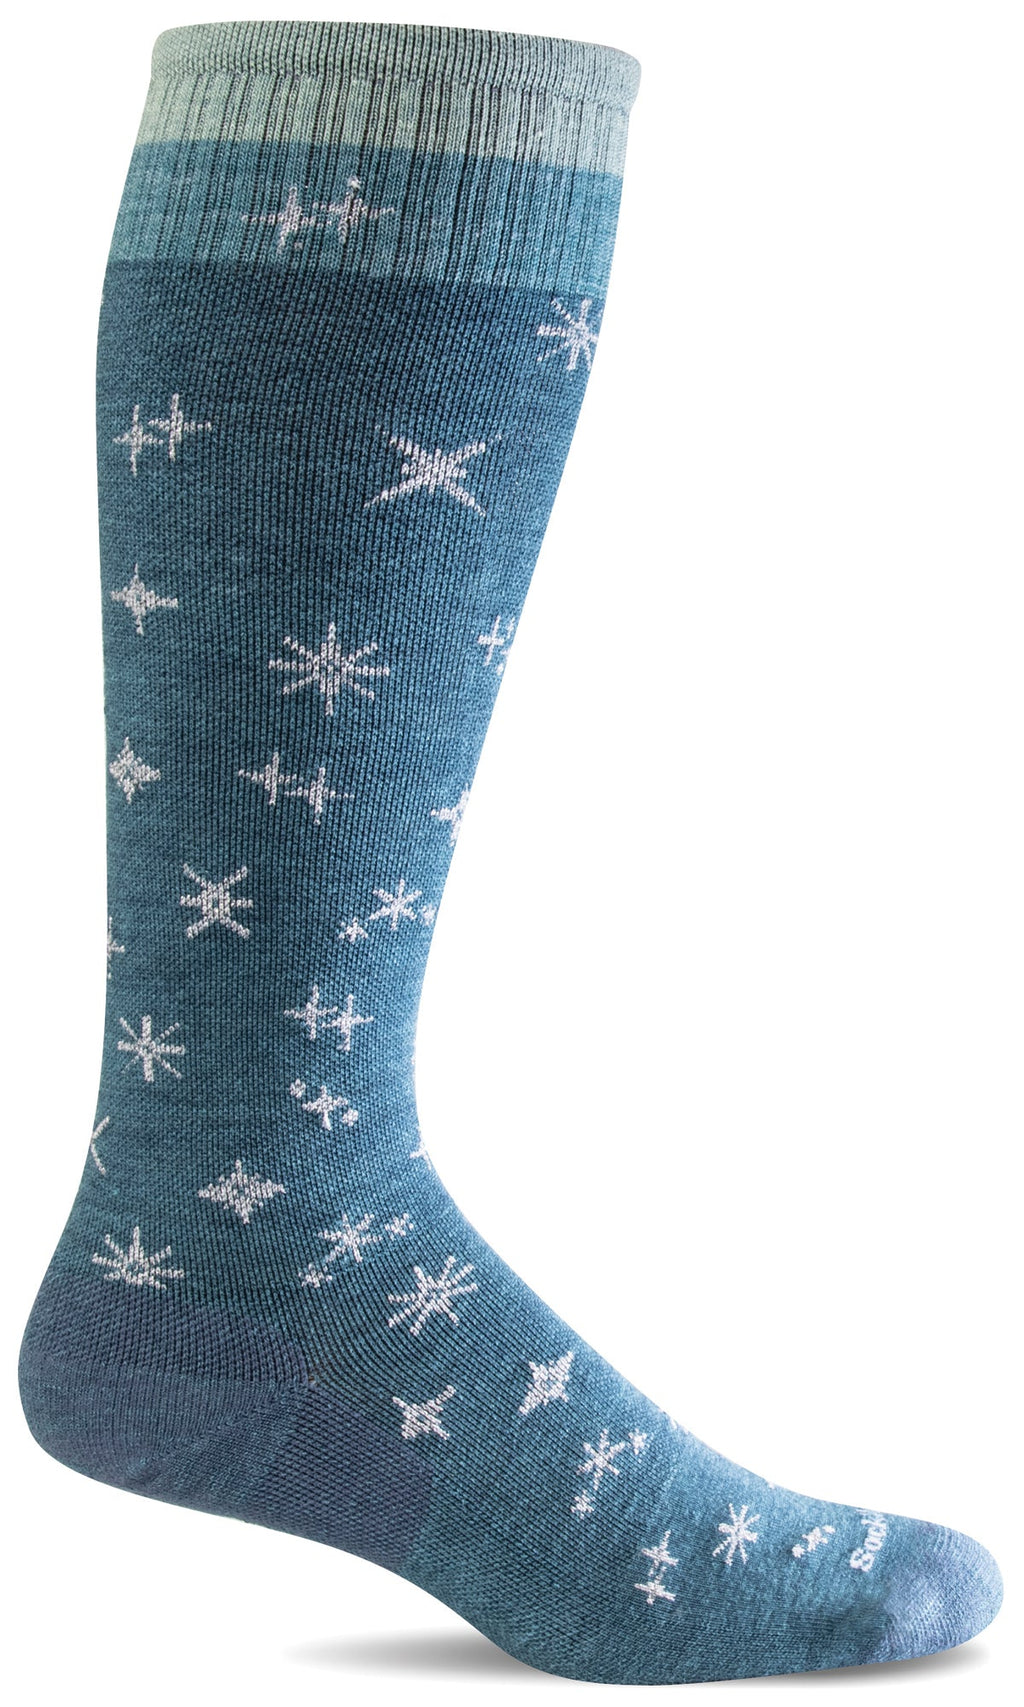 Women's Twinkle | Firm Graduated Compression Socks - Merino Wool Lifestyle Compression - Sockwell